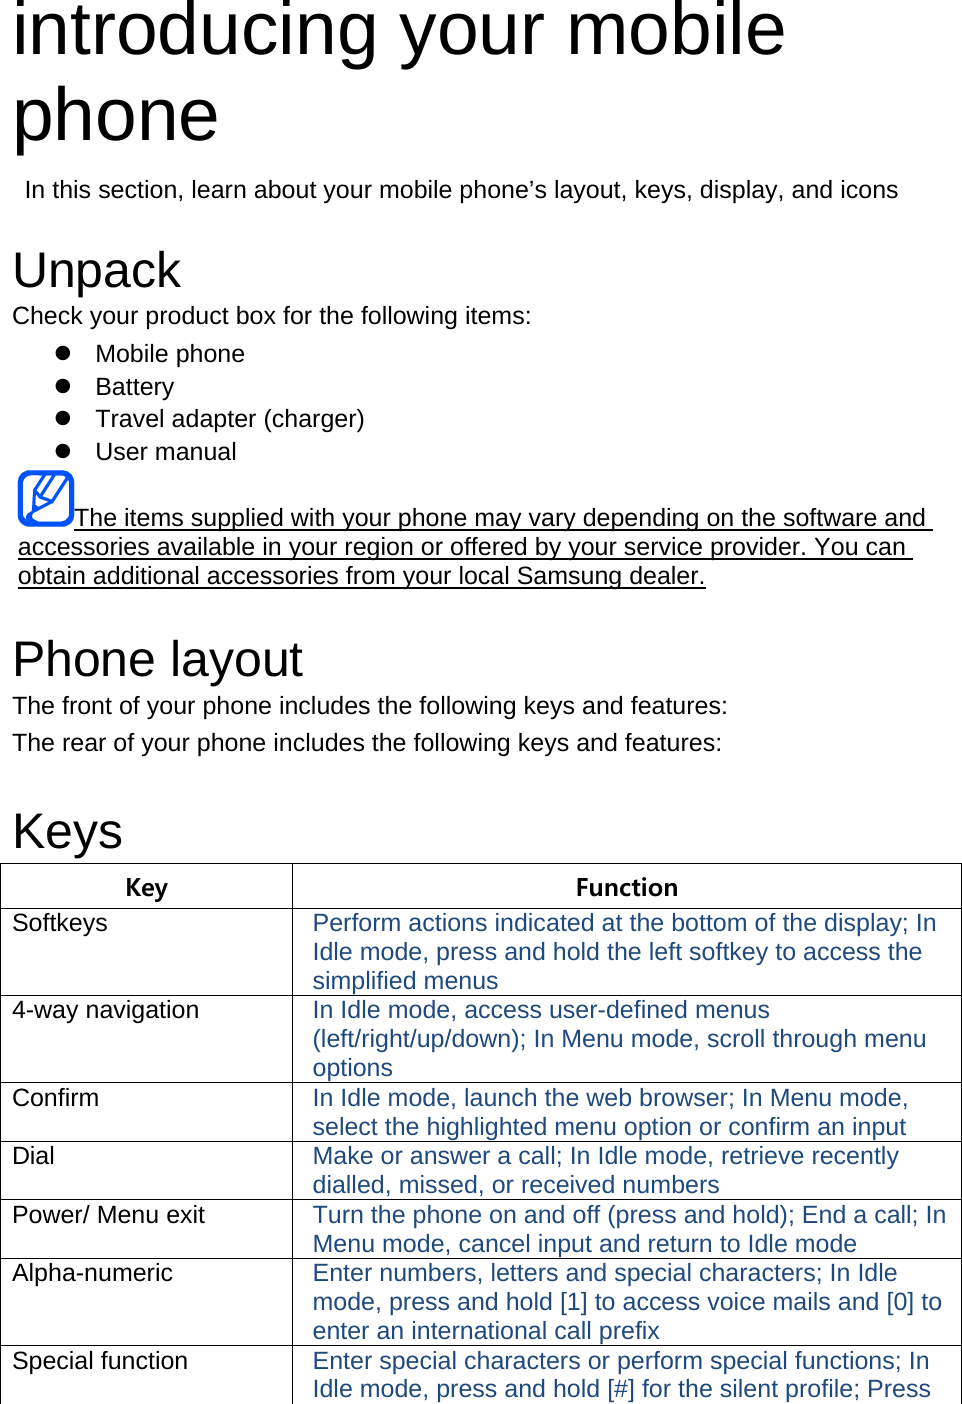 introducing your mobile phone   In this section, learn about your mobile phone’s layout, keys, display, and icons  Unpack Check your product box for the following items:  Mobile phone  Battery   Travel adapter (charger)  User manual UThe items supplied with your phone may vary depending on the software and accessories available in your region or offered by your service provider. You can obtain additional accessories from your local Samsung dealer.U  Phone layout The front of your phone includes the following keys and features: The rear of your phone includes the following keys and features:  Keys Key  Function Softkeys  Perform actions indicated at the bottom of the display; In Idle mode, press and hold the left softkey to access the simplified menus 4-way navigation  In Idle mode, access user-defined menus (left/right/up/down); In Menu mode, scroll through menu options Confirm  In Idle mode, launch the web browser; In Menu mode, select the highlighted menu option or confirm an input Dial  Make or answer a call; In Idle mode, retrieve recently dialled, missed, or received numbers Power/ Menu exit  Turn the phone on and off (press and hold); End a call; In Menu mode, cancel input and return to Idle mode Alpha-numeric  Enter numbers, letters and special characters; In Idle mode, press and hold [1] to access voice mails and [0] to enter an international call prefix Special function  Enter special characters or perform special functions; In Idle mode, press and hold [#] for the silent profile; Press 